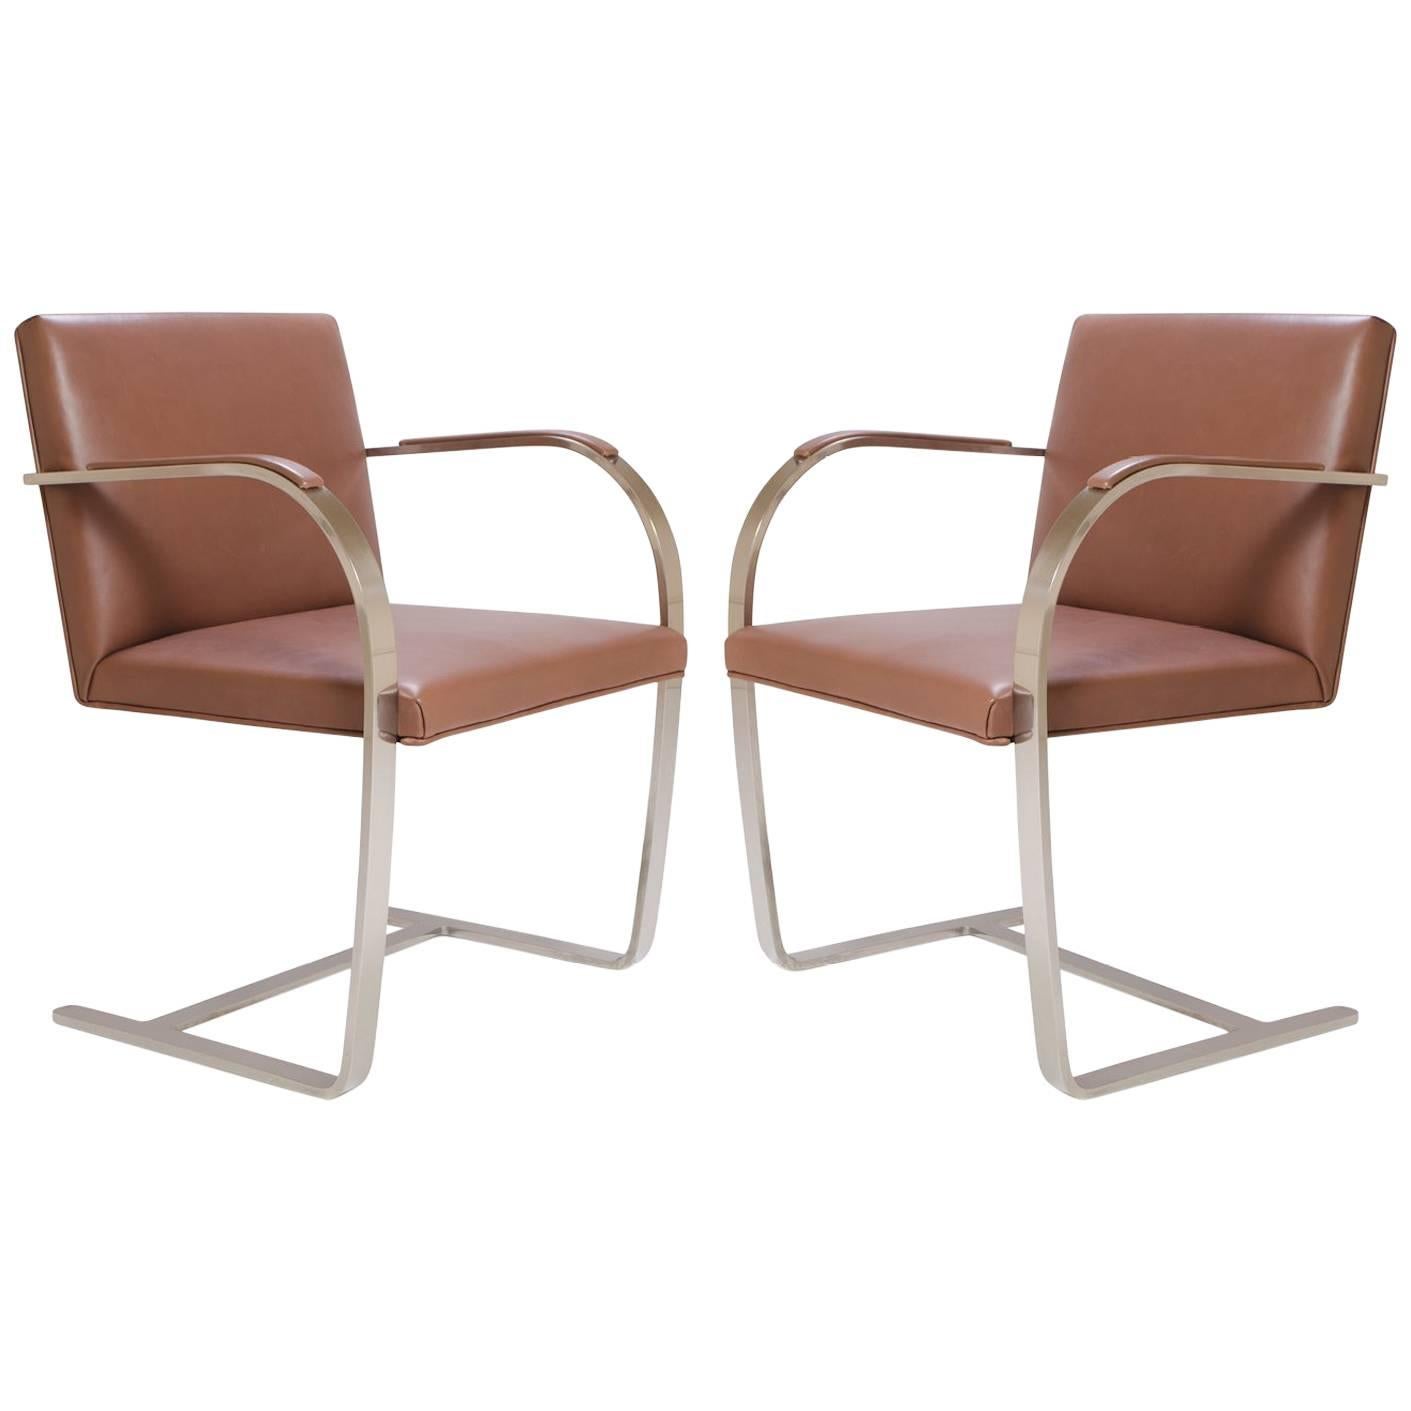 Mies van der Rohe for Knoll Brno Flat-Bar Chairs in Cognac Leather, Pair